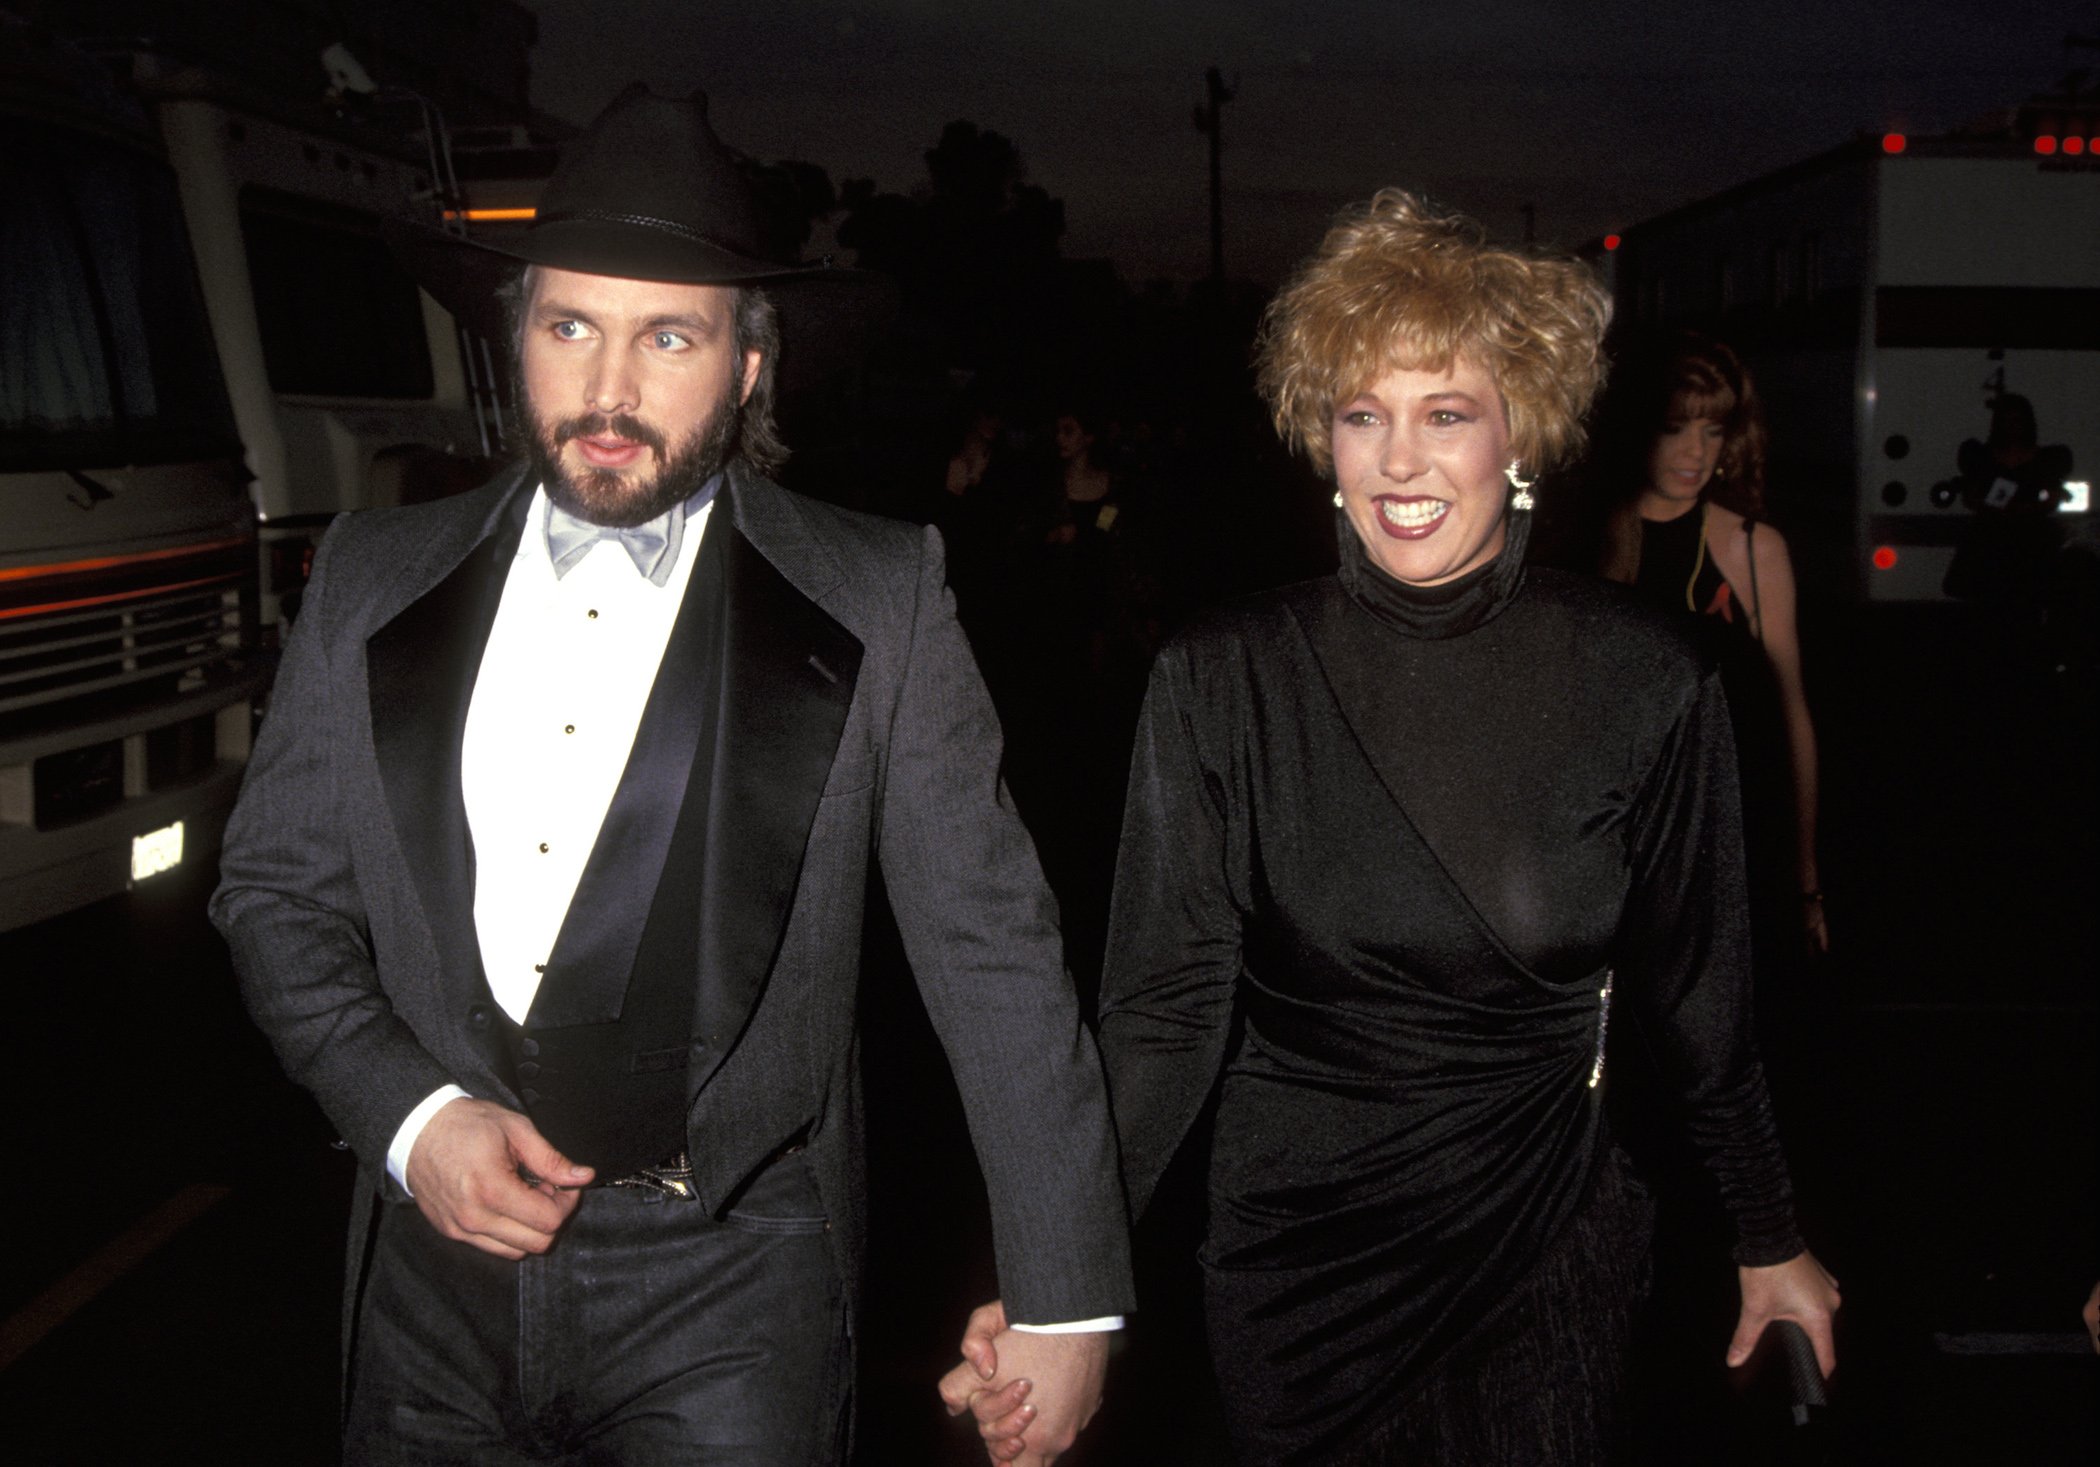 Garth Brooks and wife Sandy Mahl walking hand in hand at an awards show